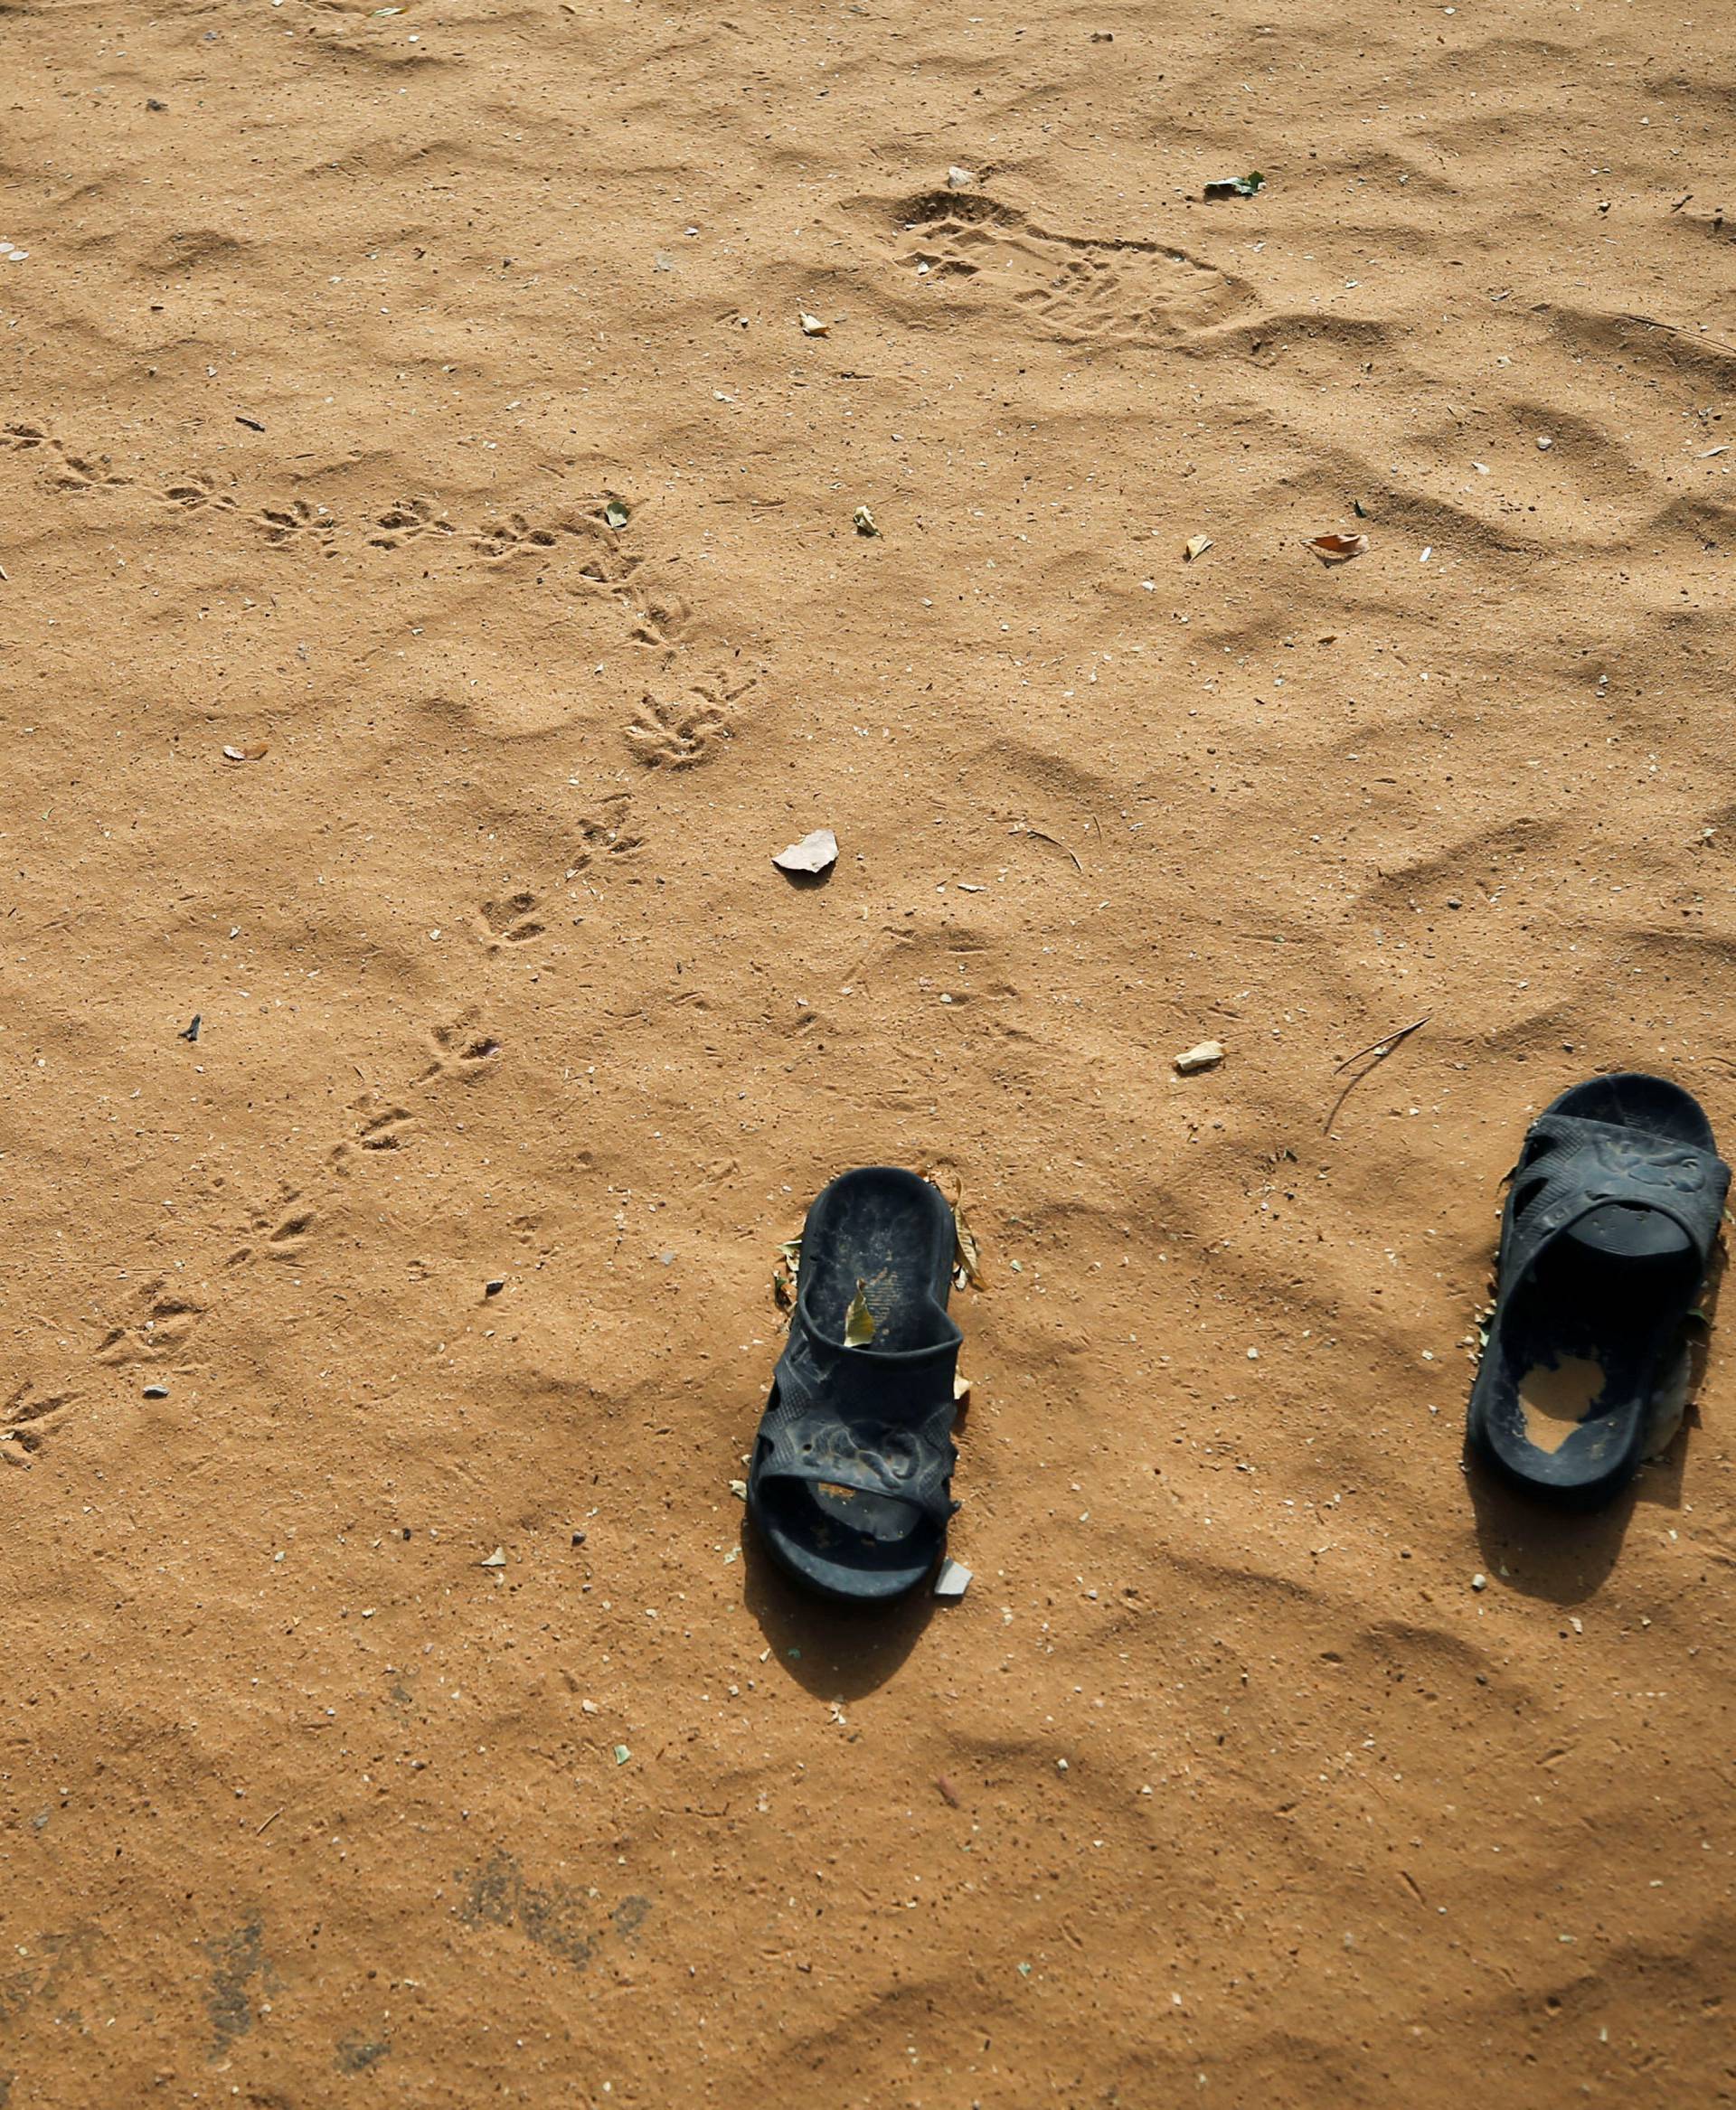 Slippers are pictured at the school compound in Dapchi in the northeastern state of Yobe, where dozens of school girls went missing after an attack on the village by Boko Haram